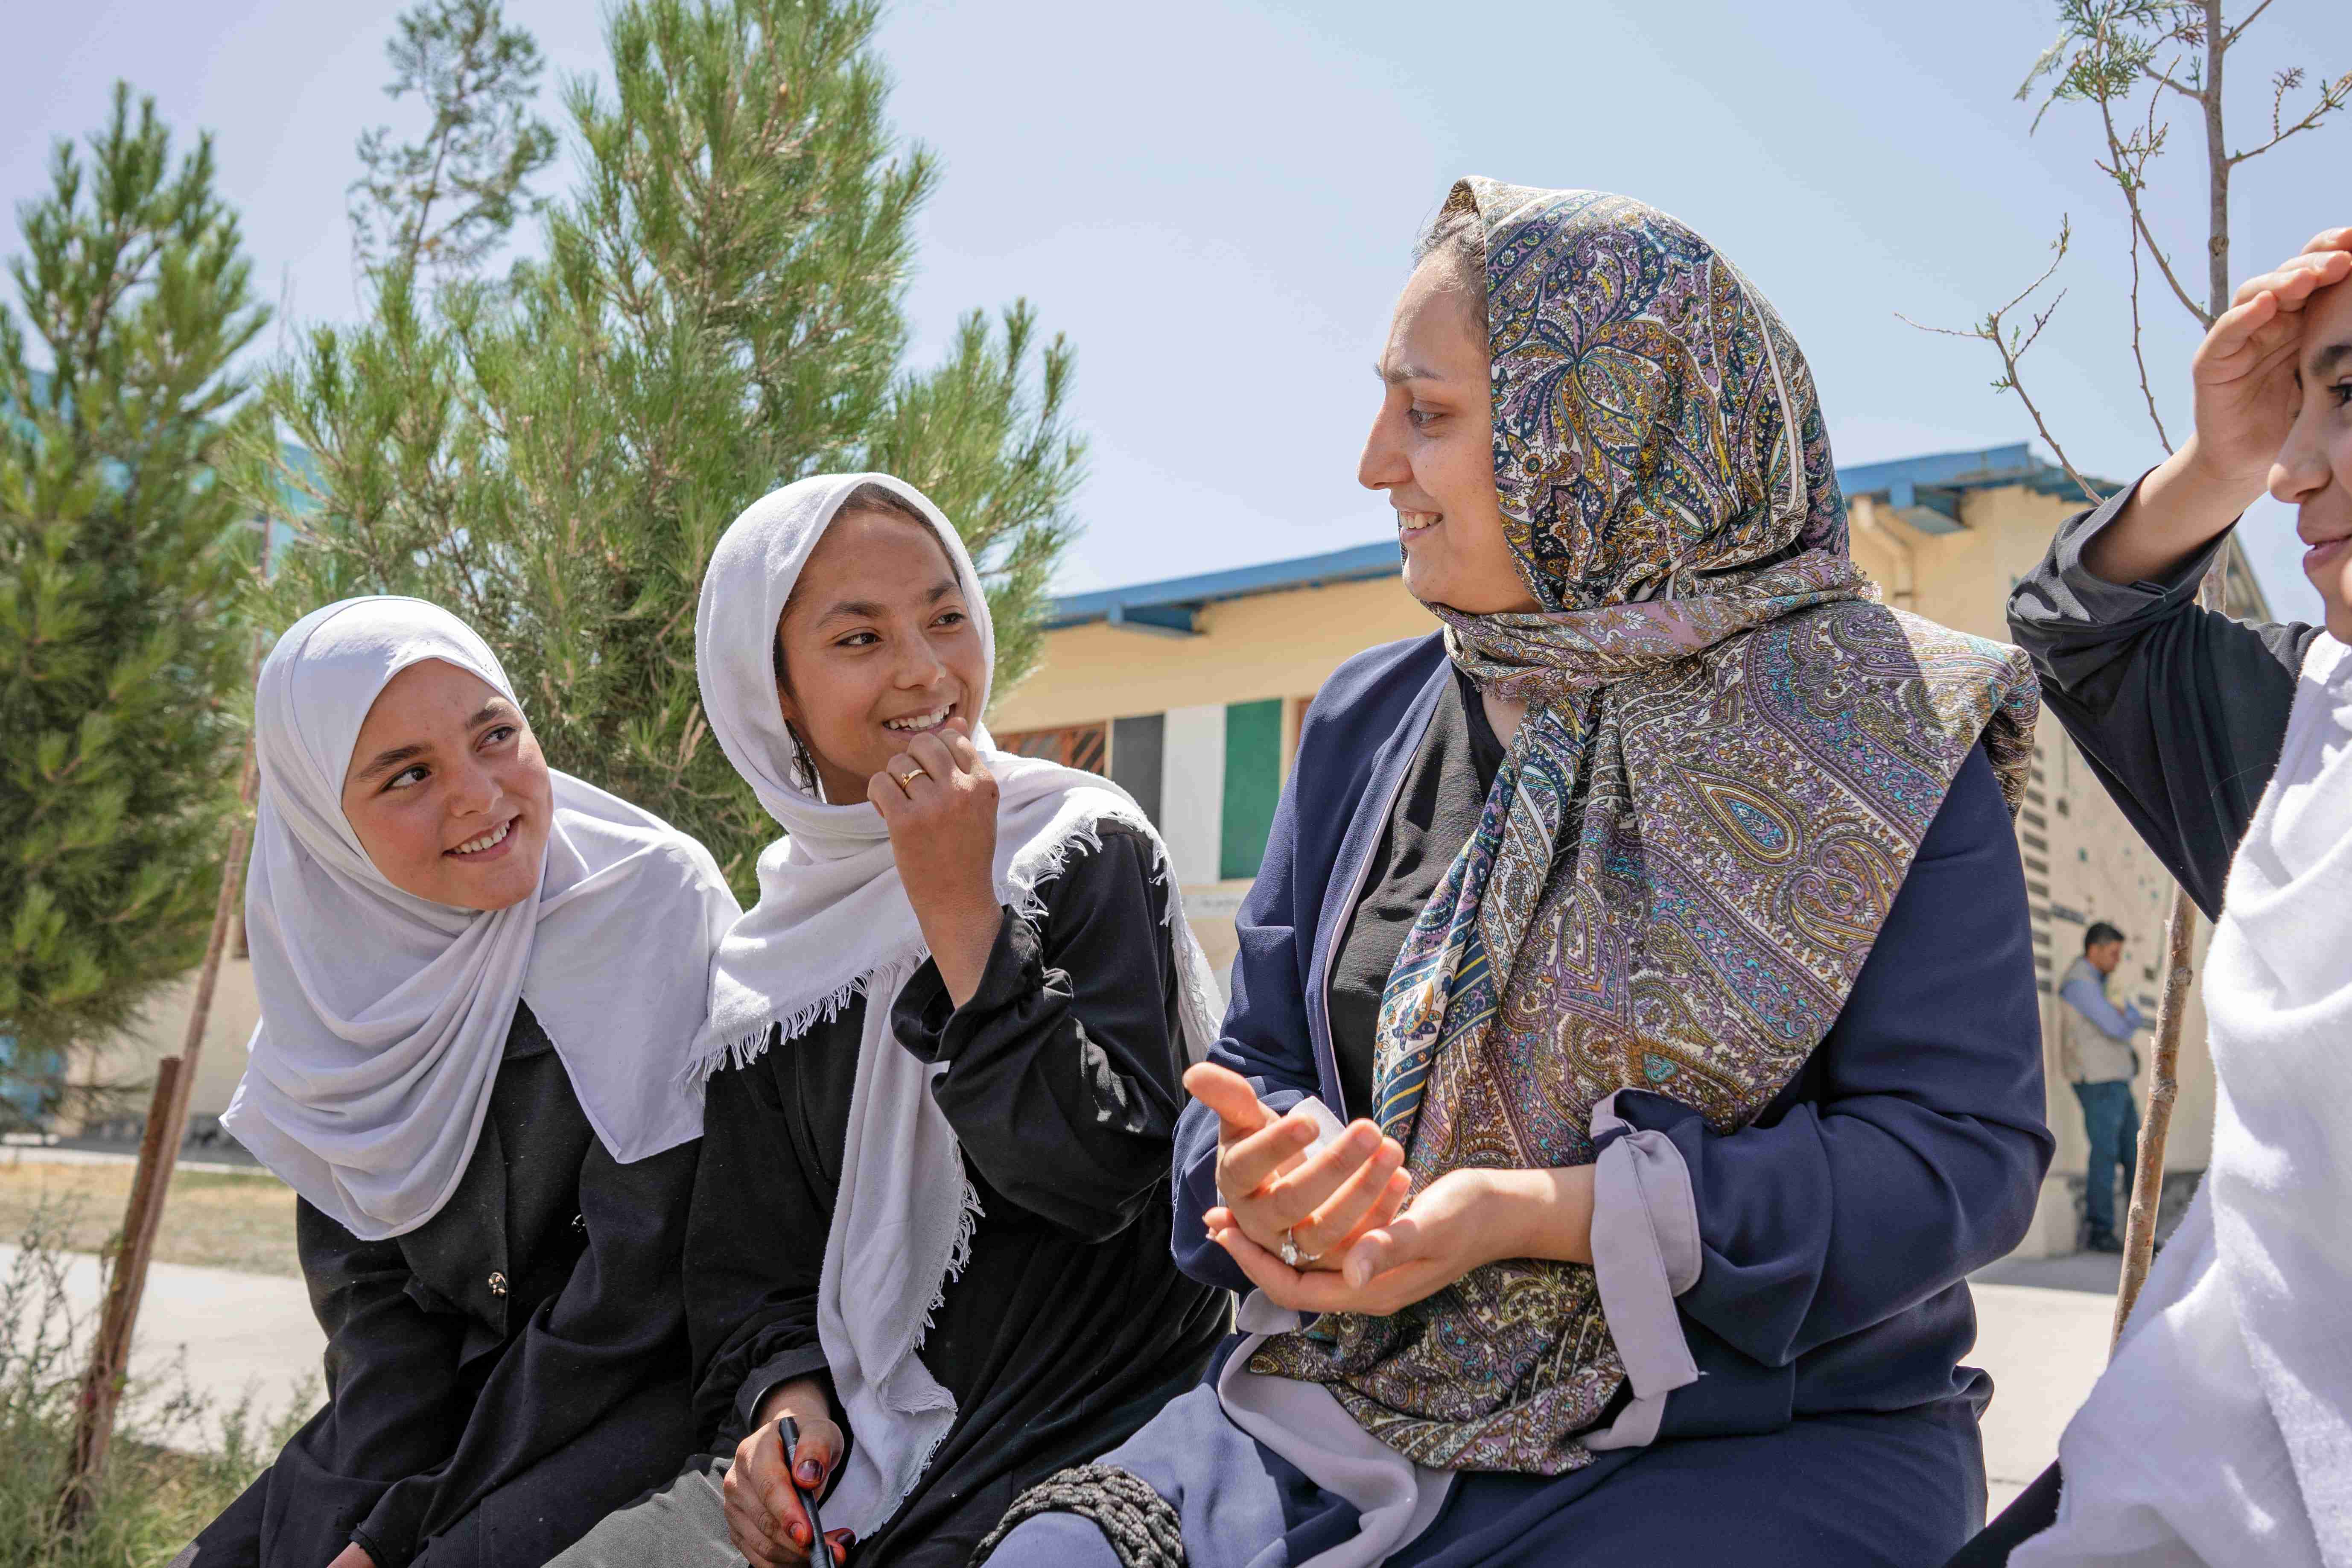 On 13th June 2022, Saida Qazizada, a teacher, educates students about menstruation at the UNICEF-supported Fatah Girls School in Herat, Afghanistan